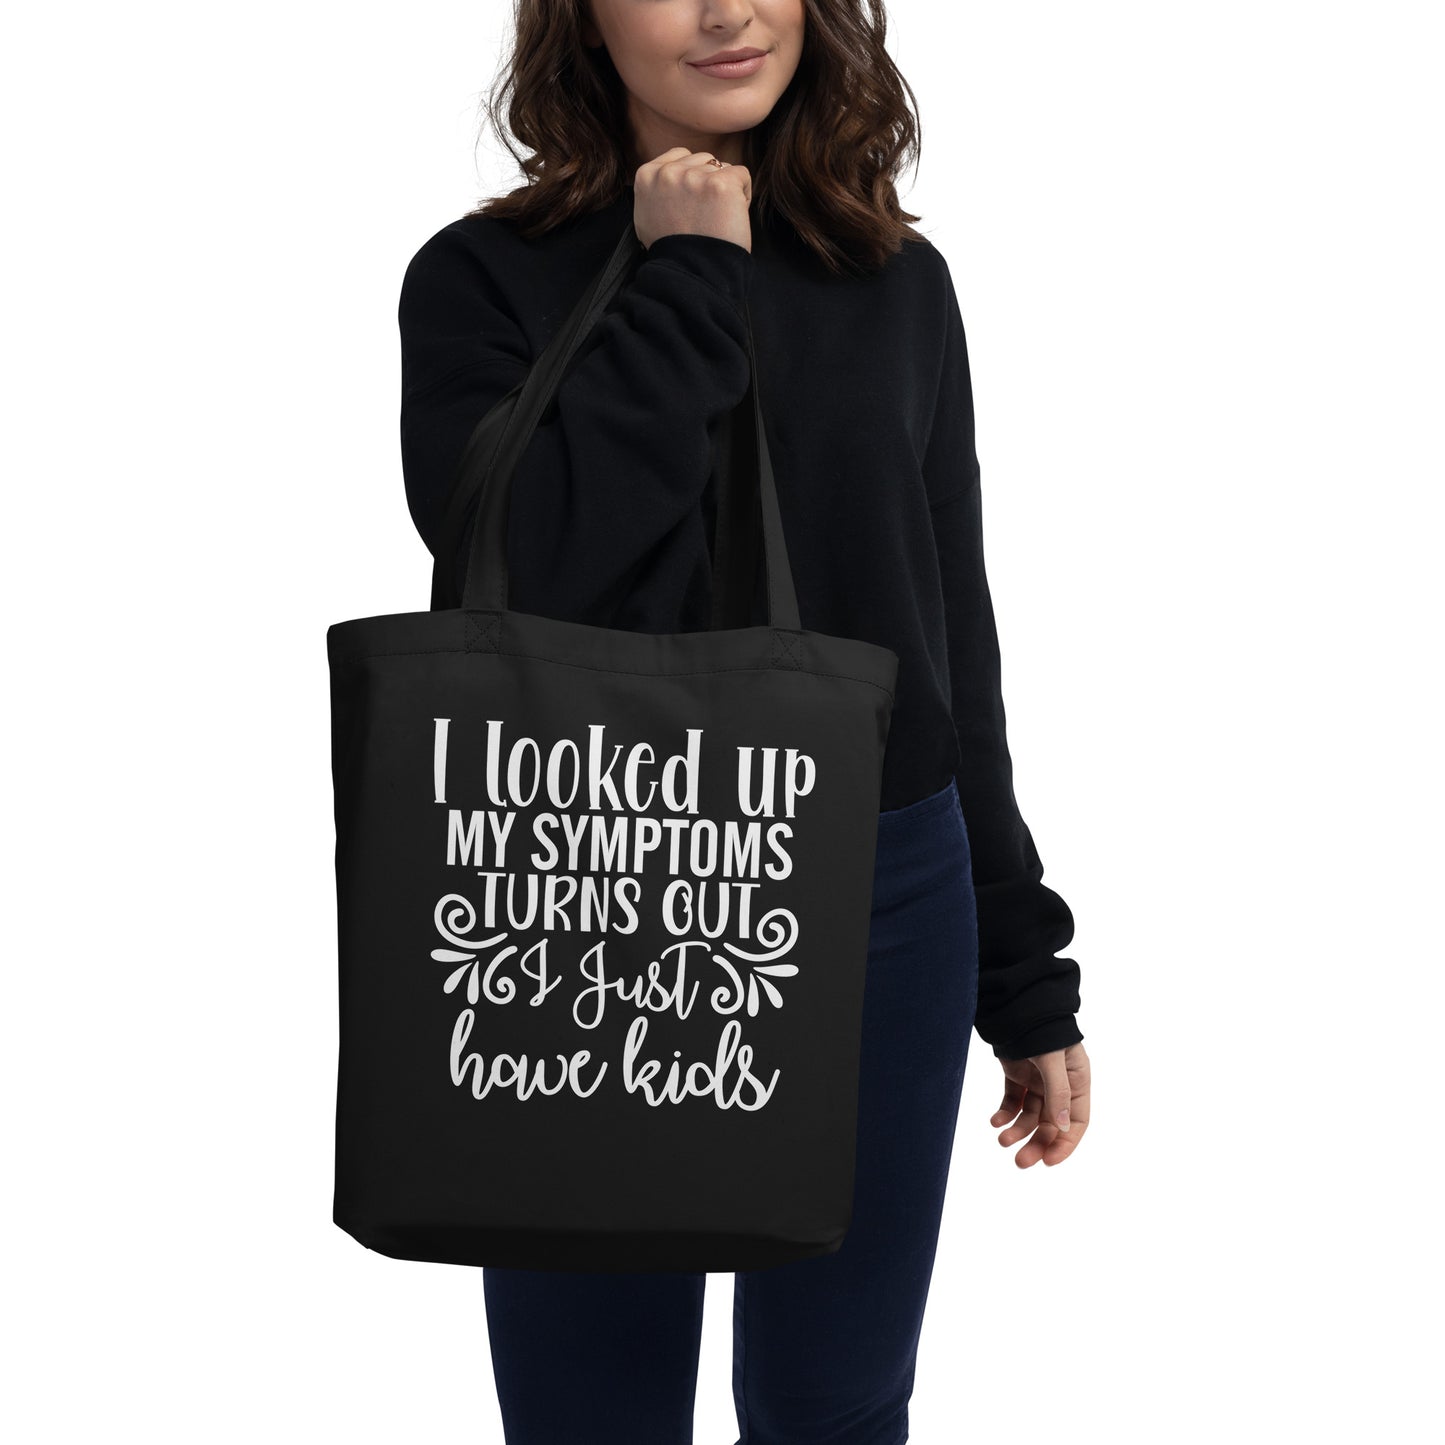 I Looked Up My Symptoms Turns Out I Just Have Kids Eco Tote Bag